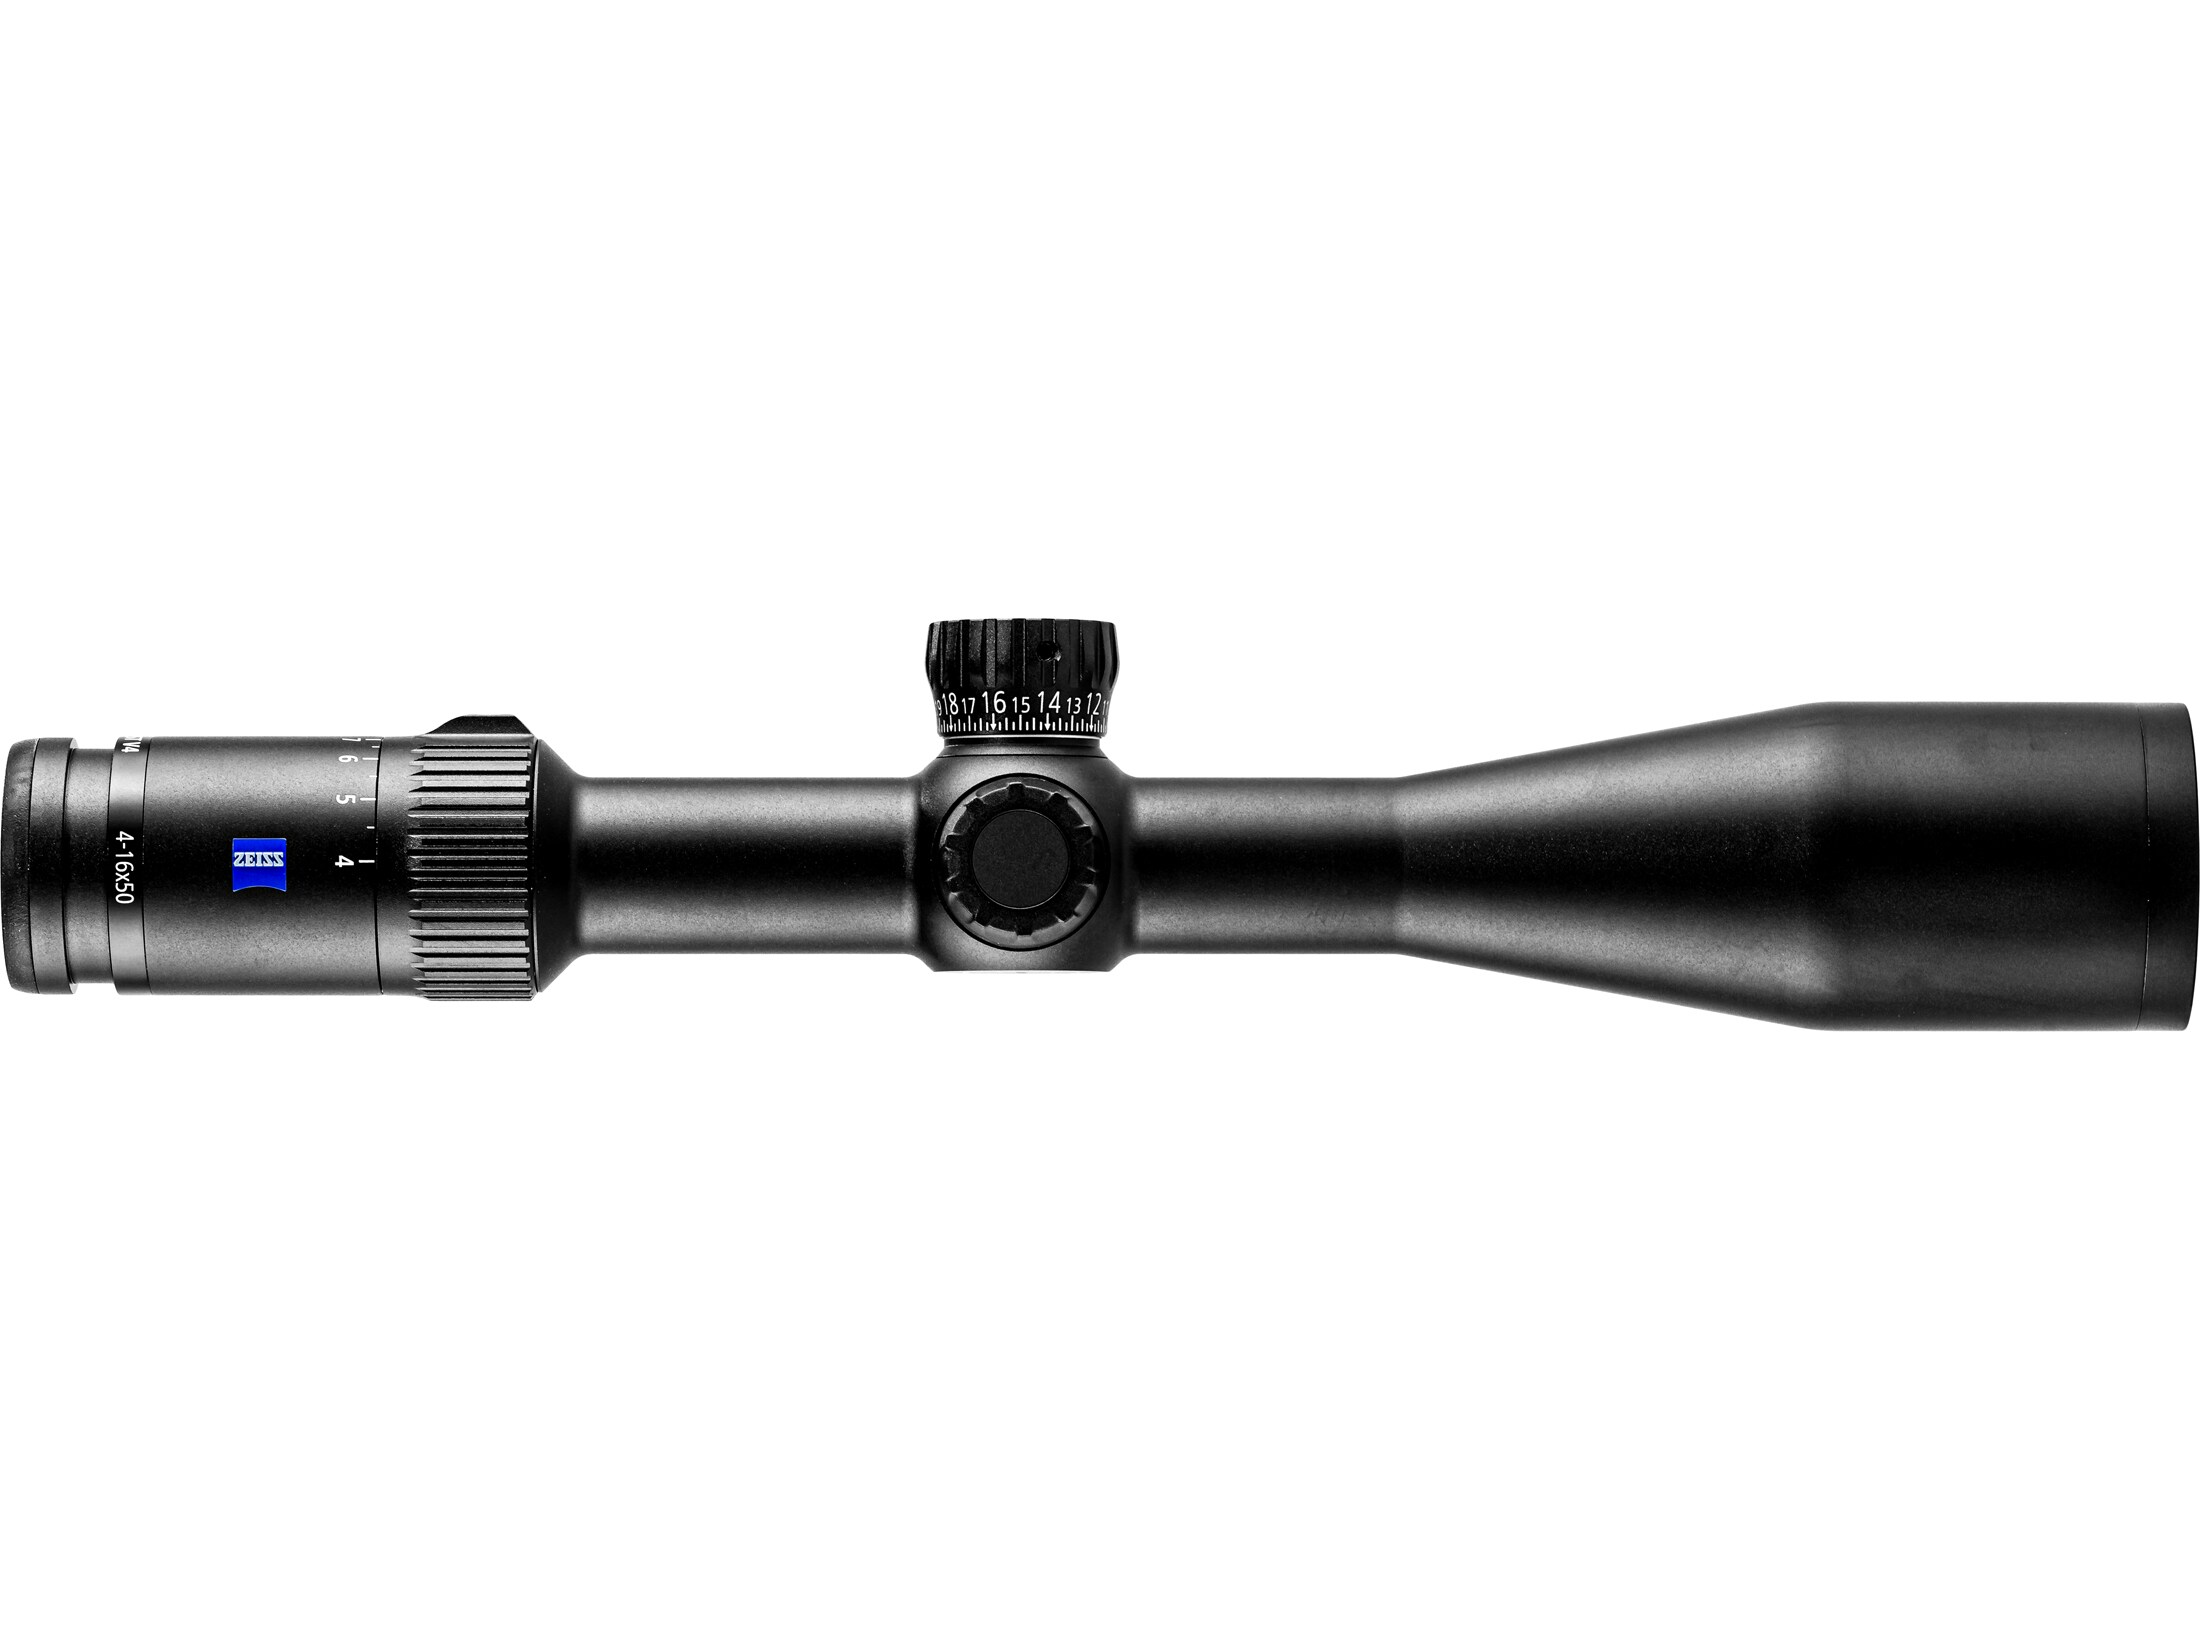 Zeiss Conquest V4 Rifle Scope 30mm Tube 4-16x 44mm Side Focus Illuminated Reticle Matte For Sale